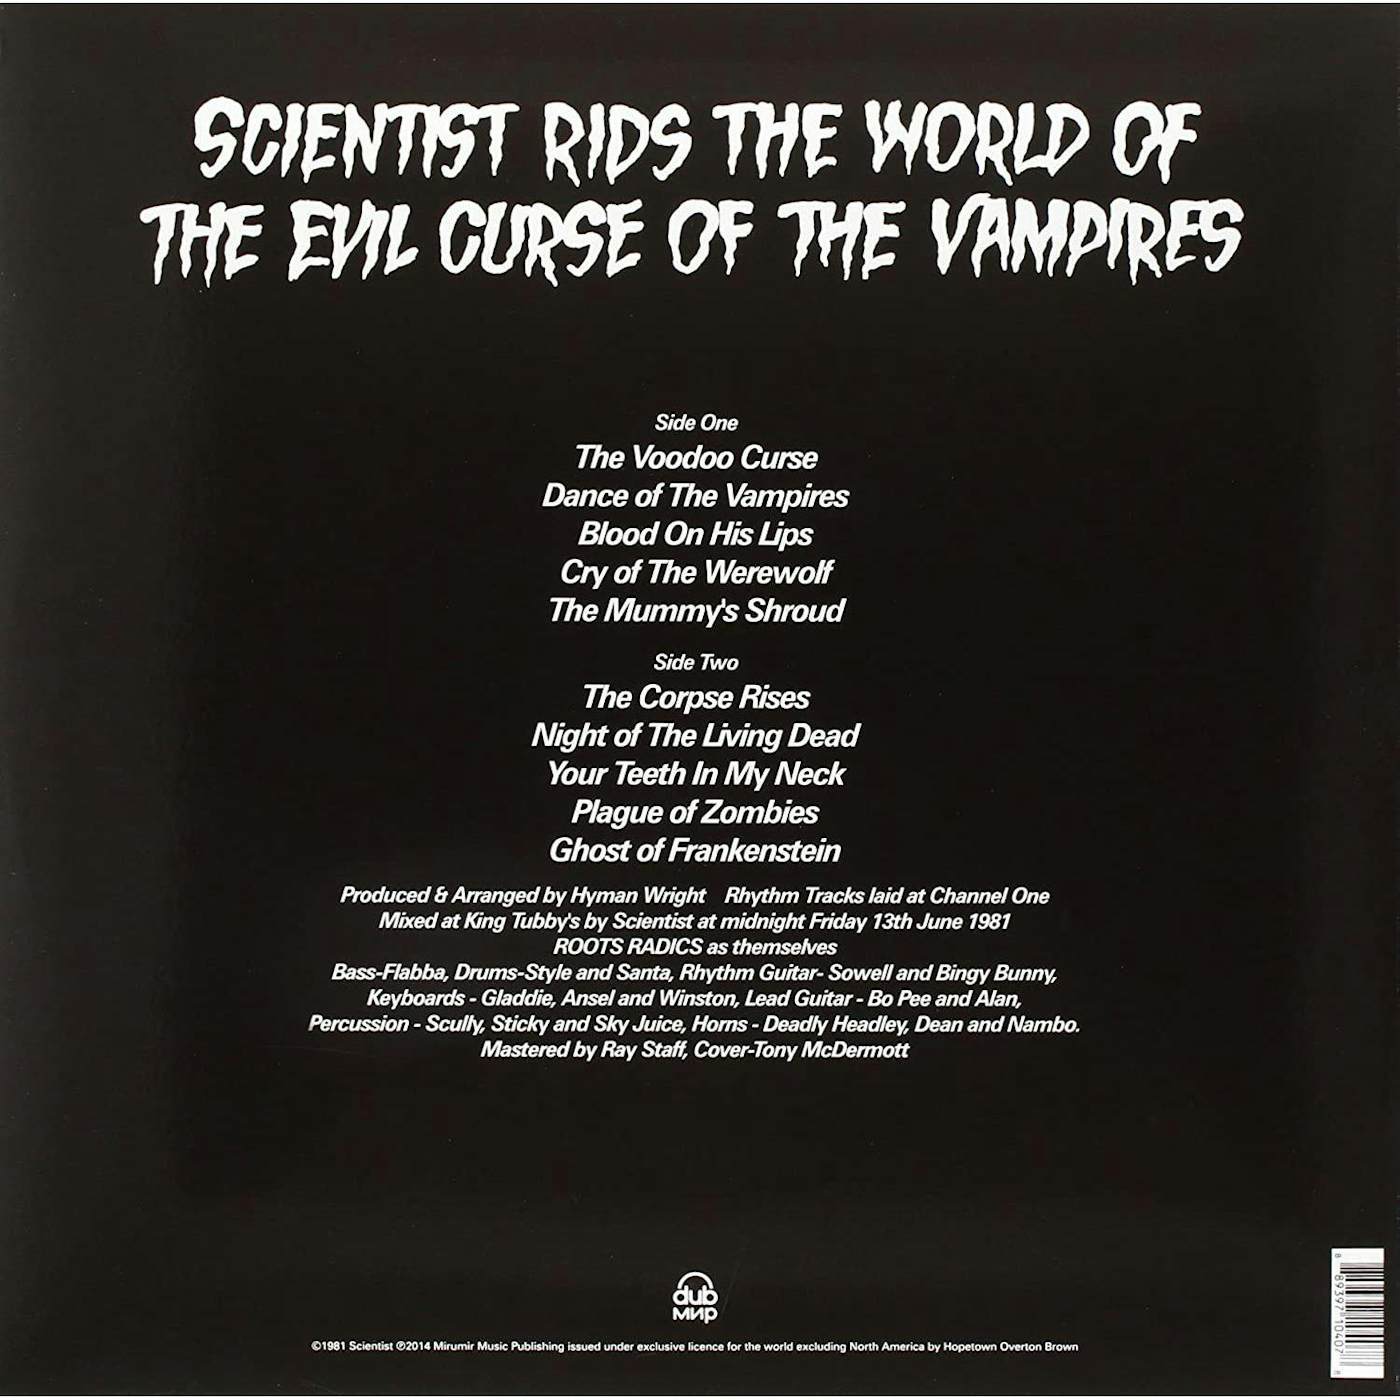 Scientist RIDS THE WORLD OF THE EVIL CURSE OF THE VAMPIRES Vinyl Record